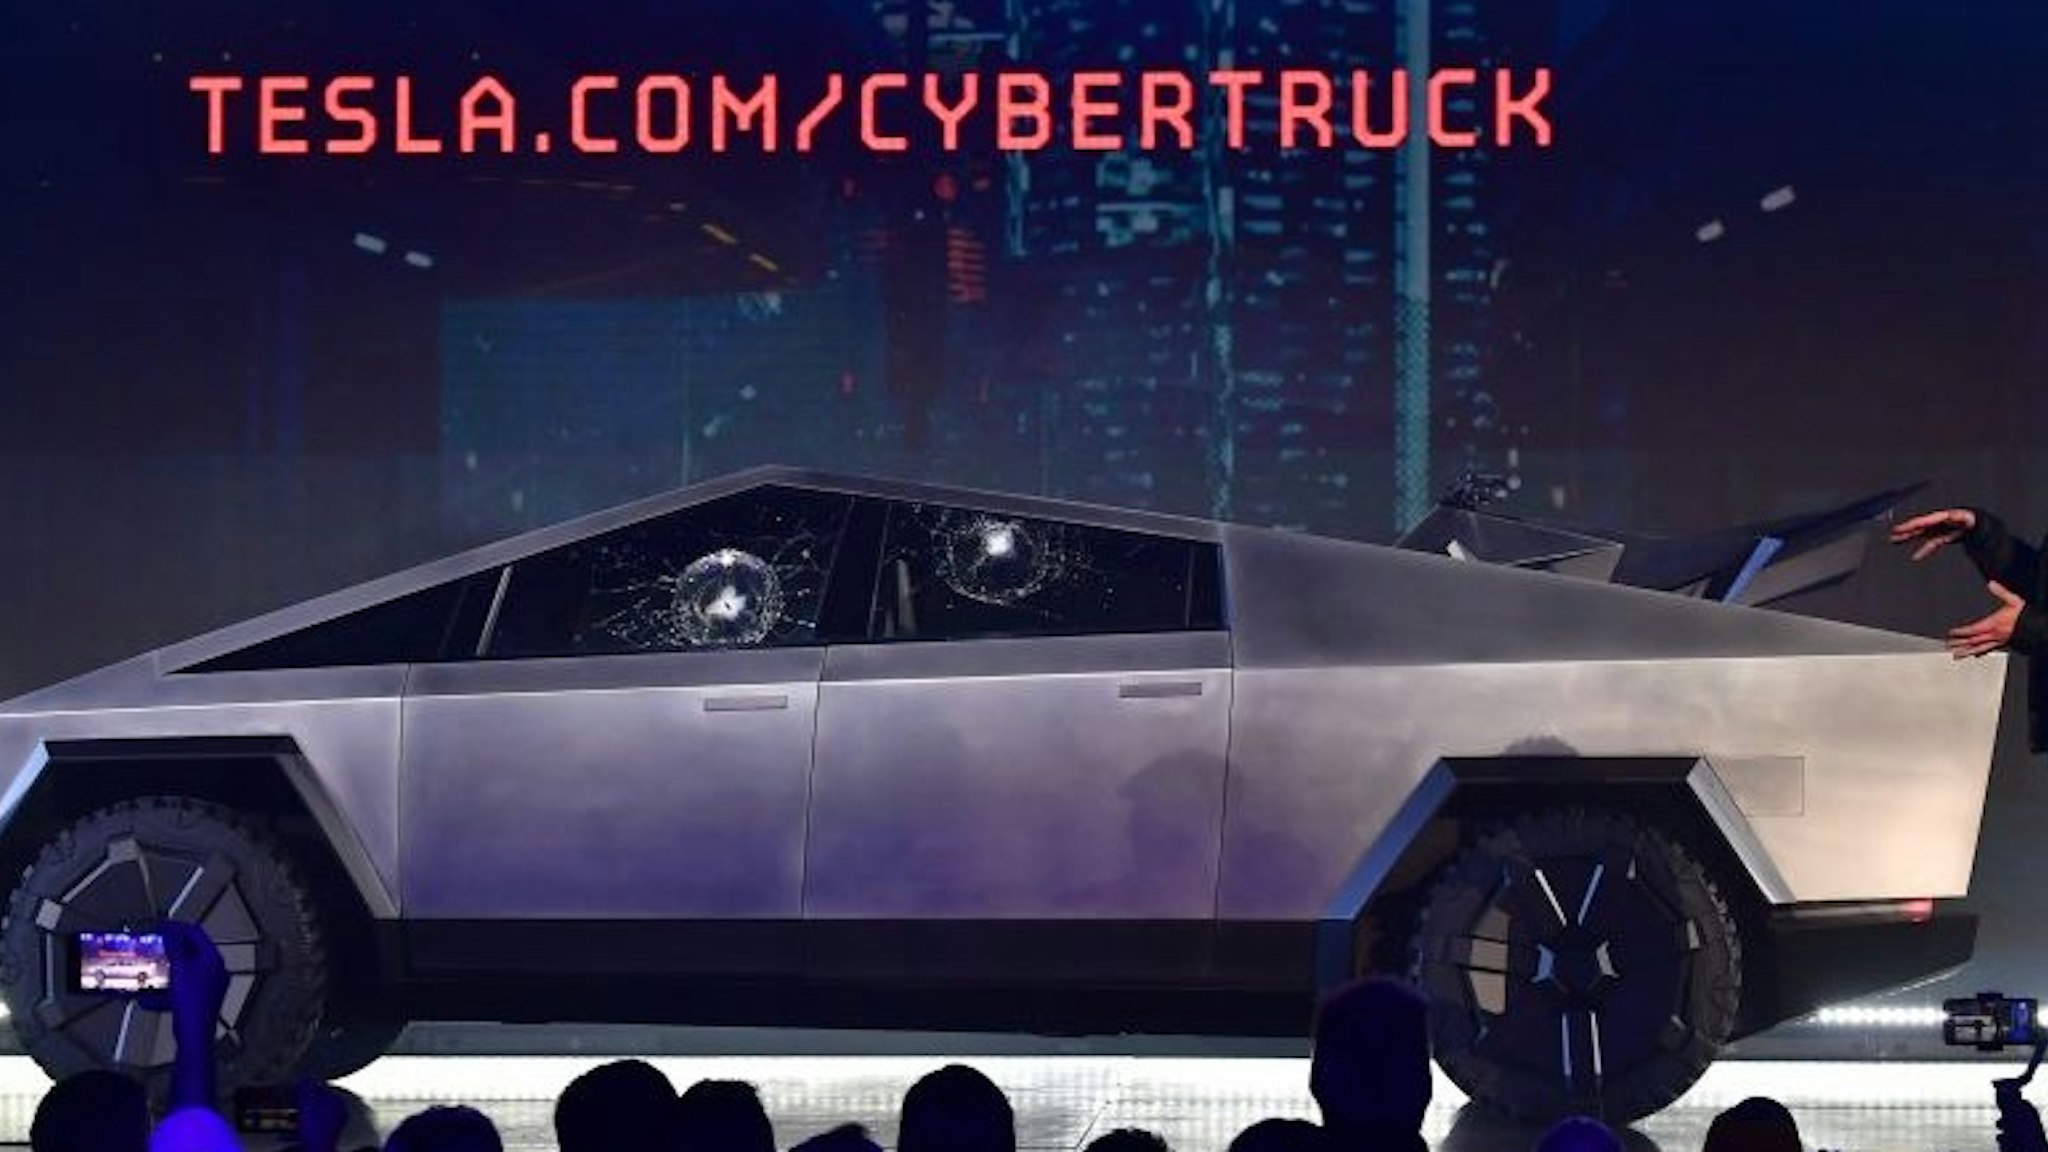 Tesla co-founder and CEO Elon Musk gestures while wrapping up his presentation of the newly unveiled all-electric battery-powered Tesla Cybertruck at Tesla Design Center in Hawthorne, California on November 21, 2019.